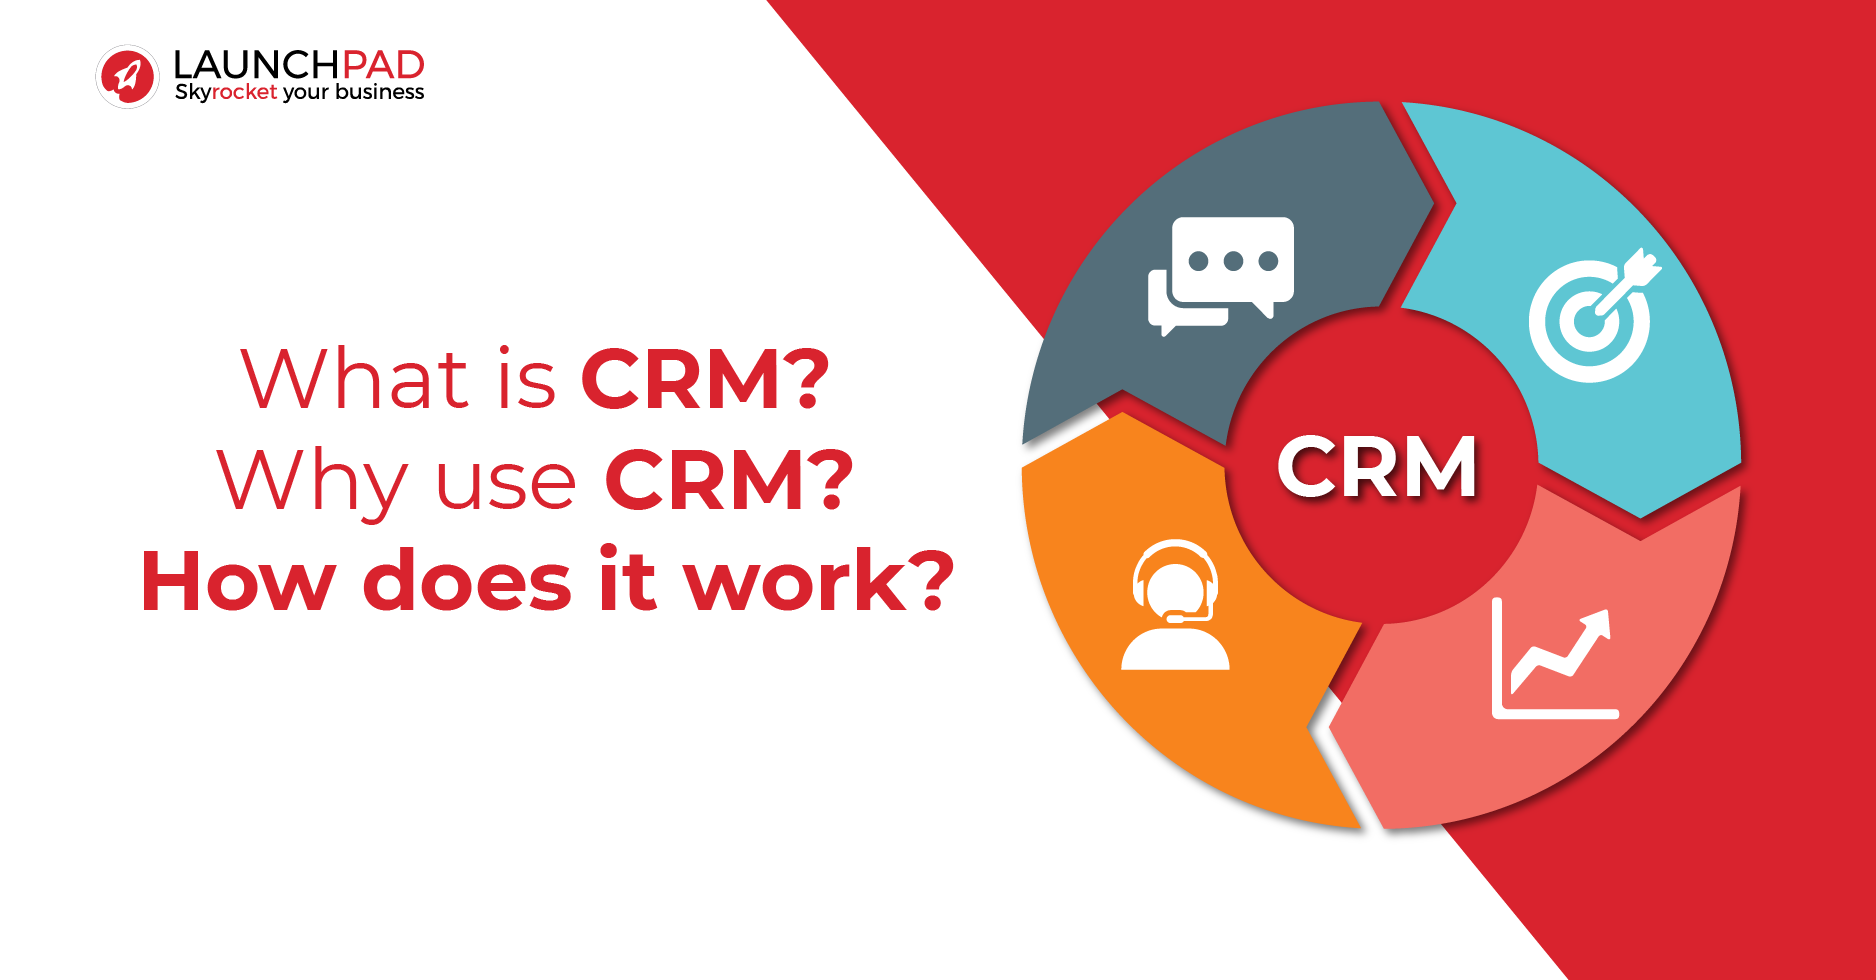 What is Customer Relationship Management (CRM) & How Does It Work?